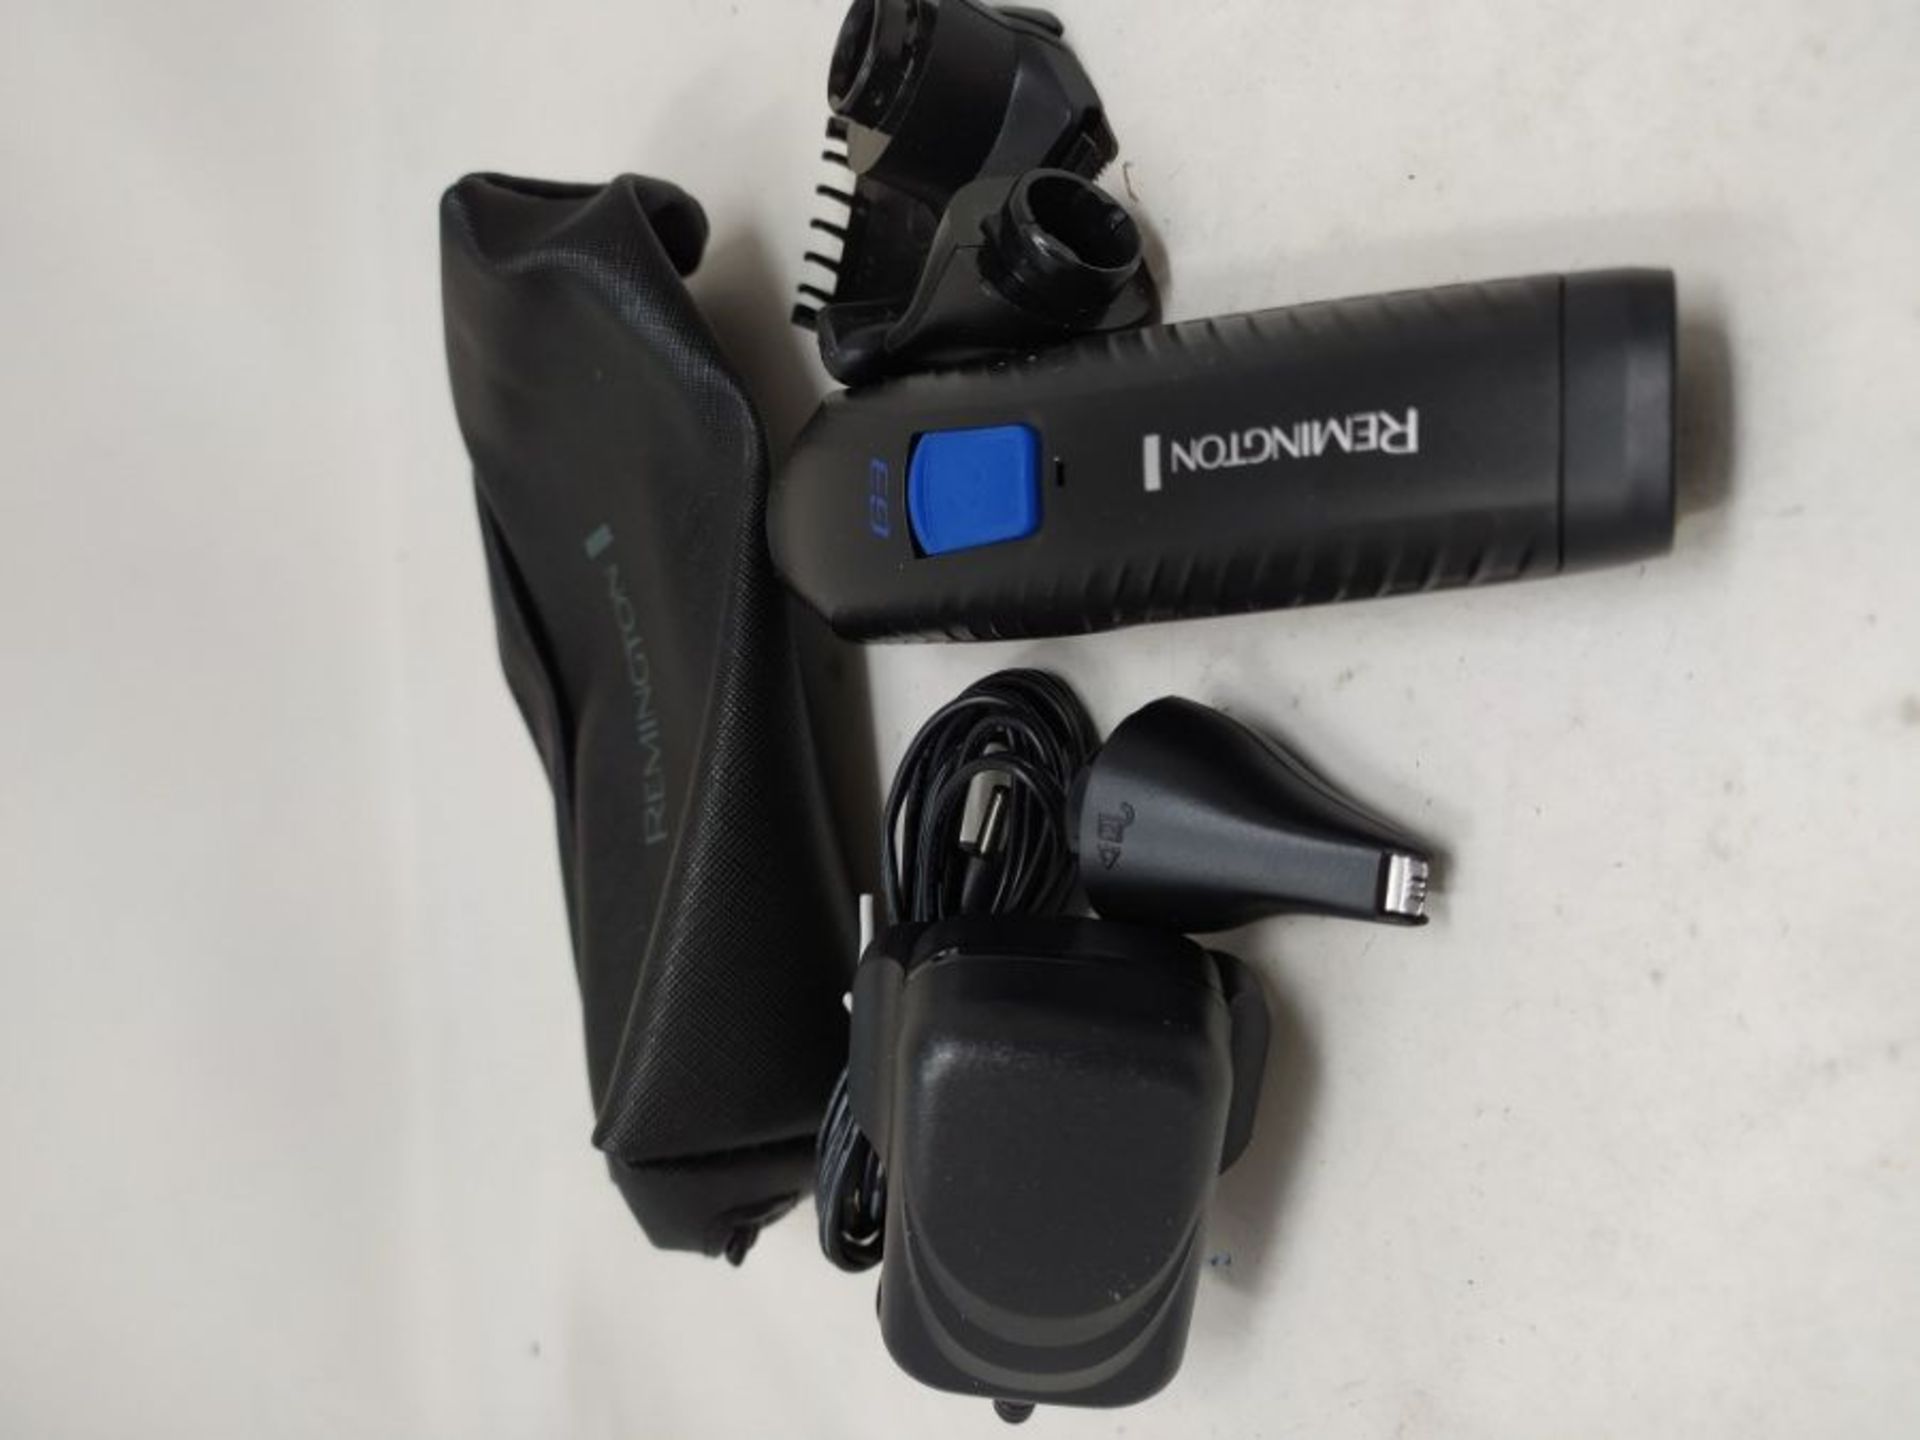 Remington Graphite G3, All-in-One Cordless Electric Trimmer, Body Groomer and Nose Hai - Image 2 of 2